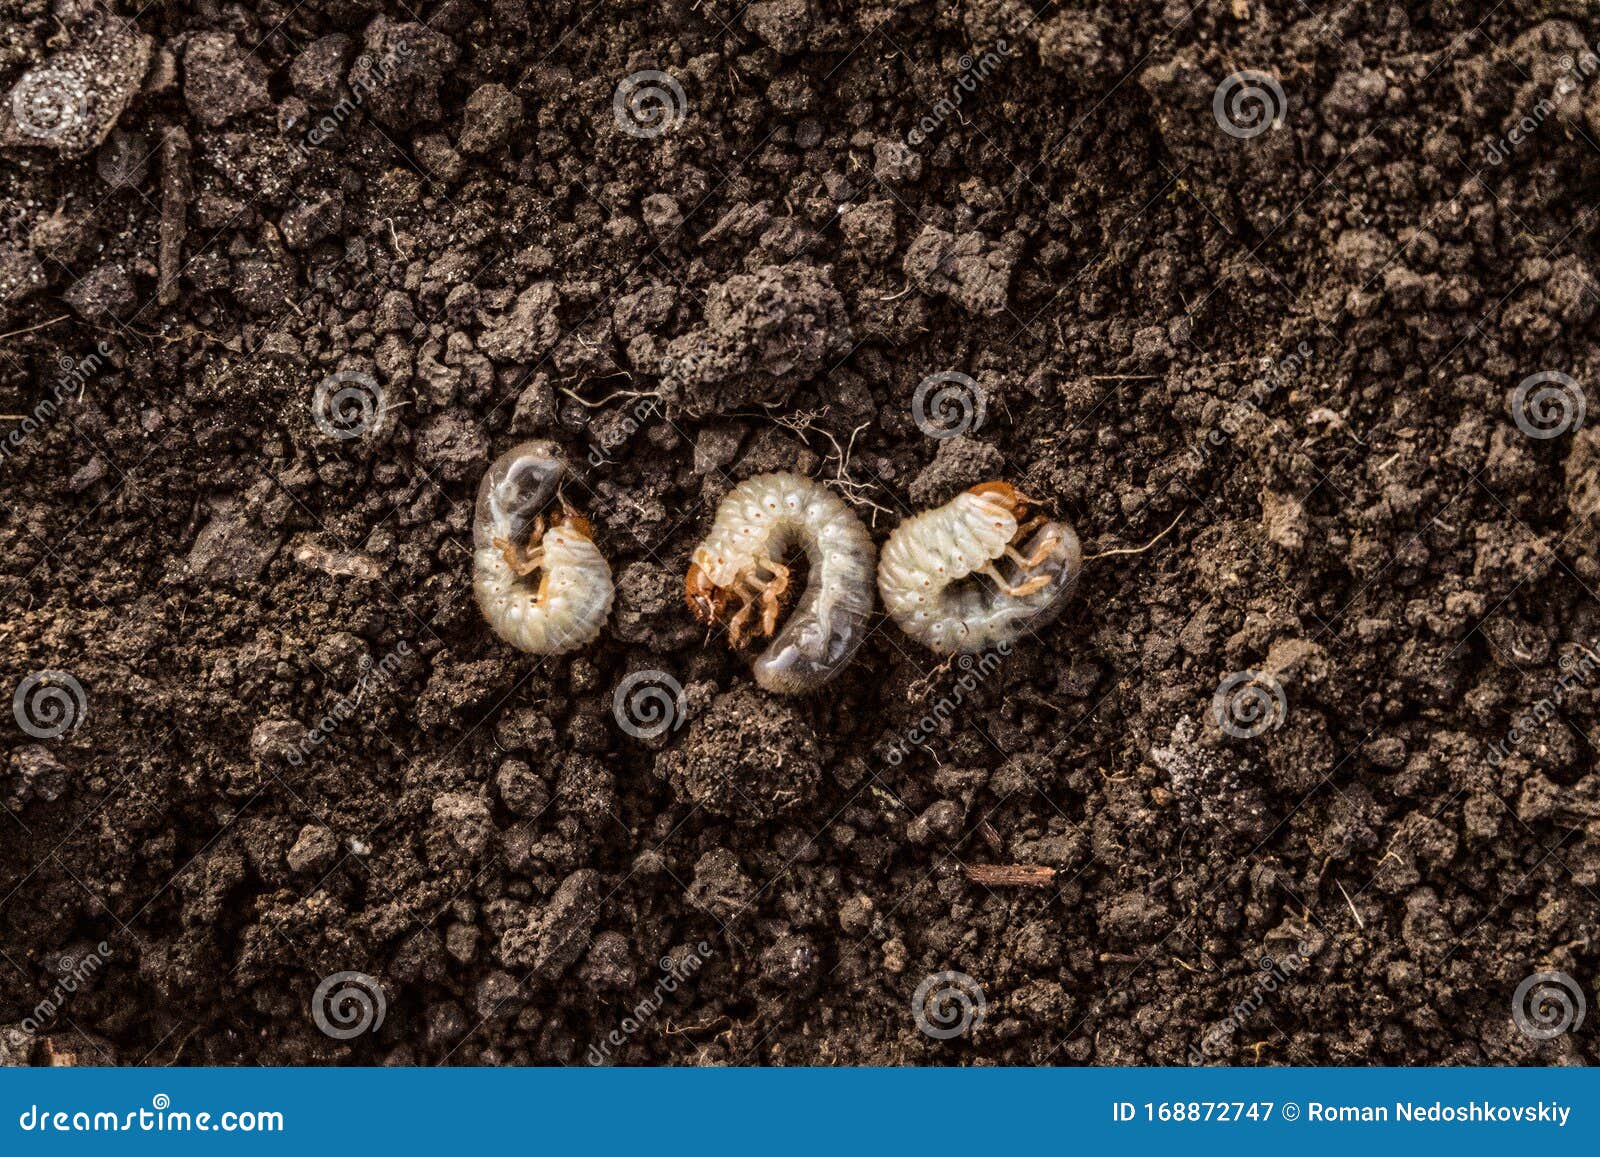 Garden Insect Pest On Vegetable Garden Soil Stock Image Image Of Agriculture Bugs